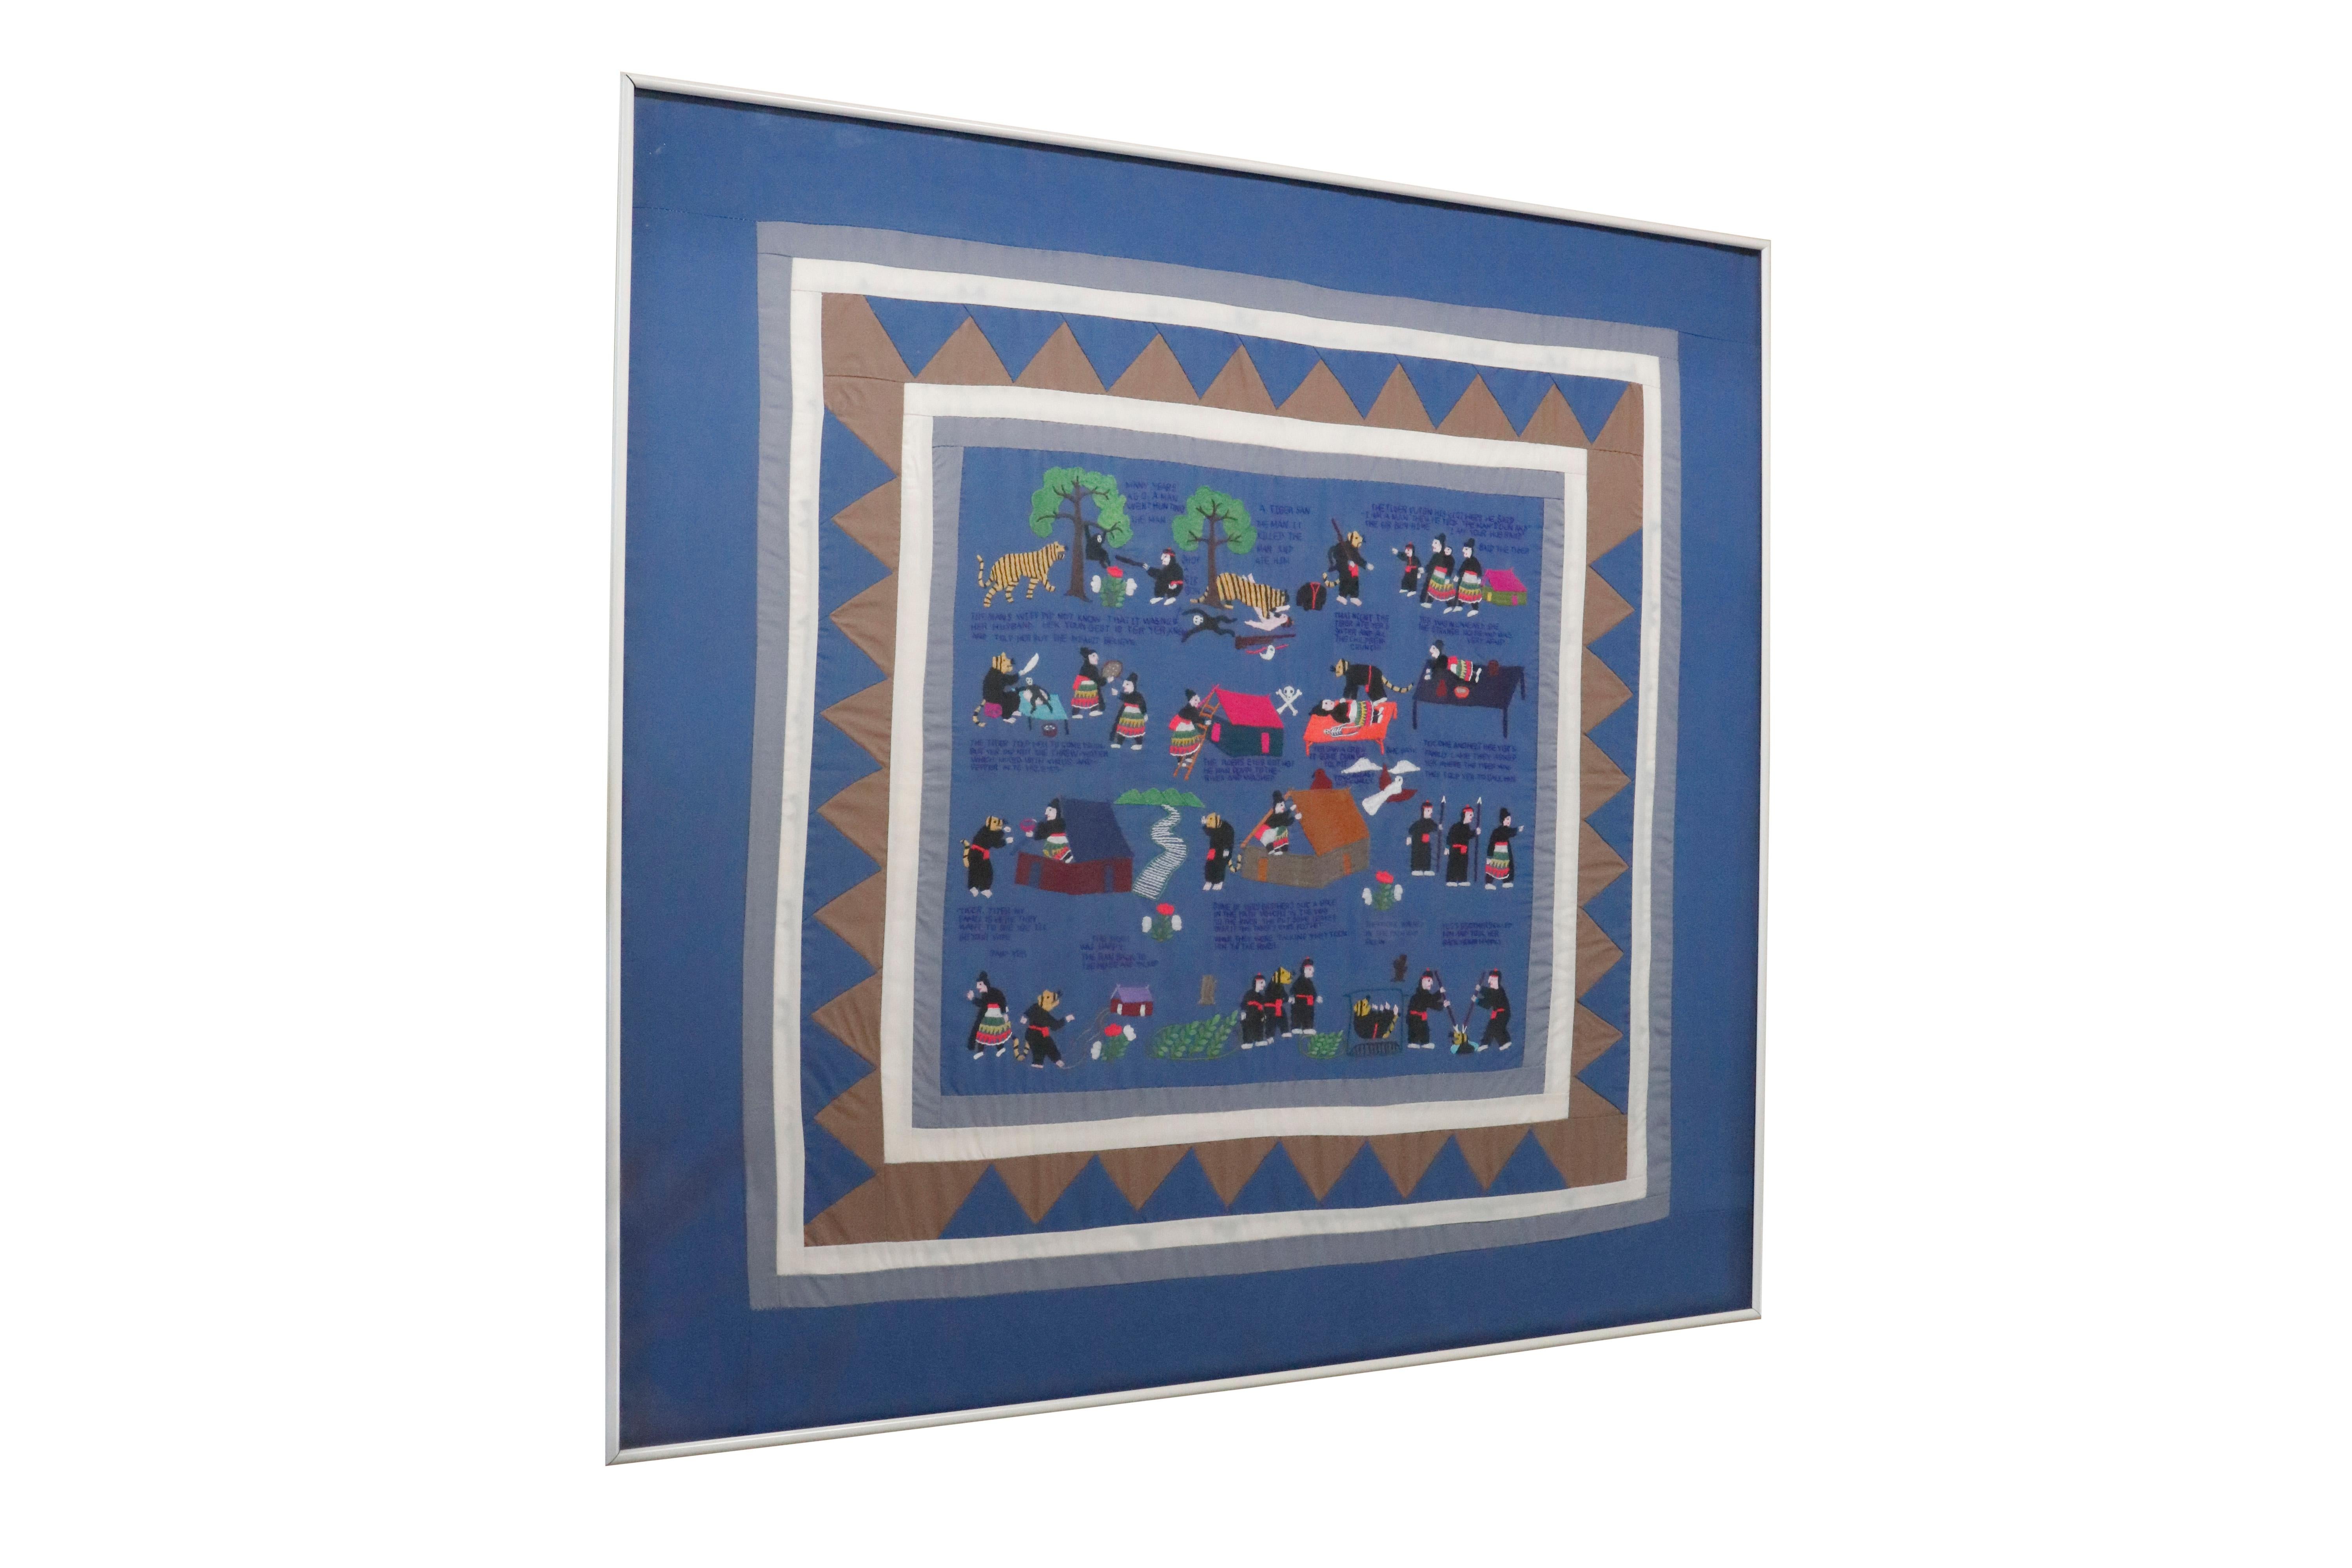 A traditional story quilt. A blue background is embroidered to tell the story of a tiger who kills and impersonates man who shoots a gibbon. Framed with a light blue and white border decorated with brown and blue triangles. Set behind glass in a